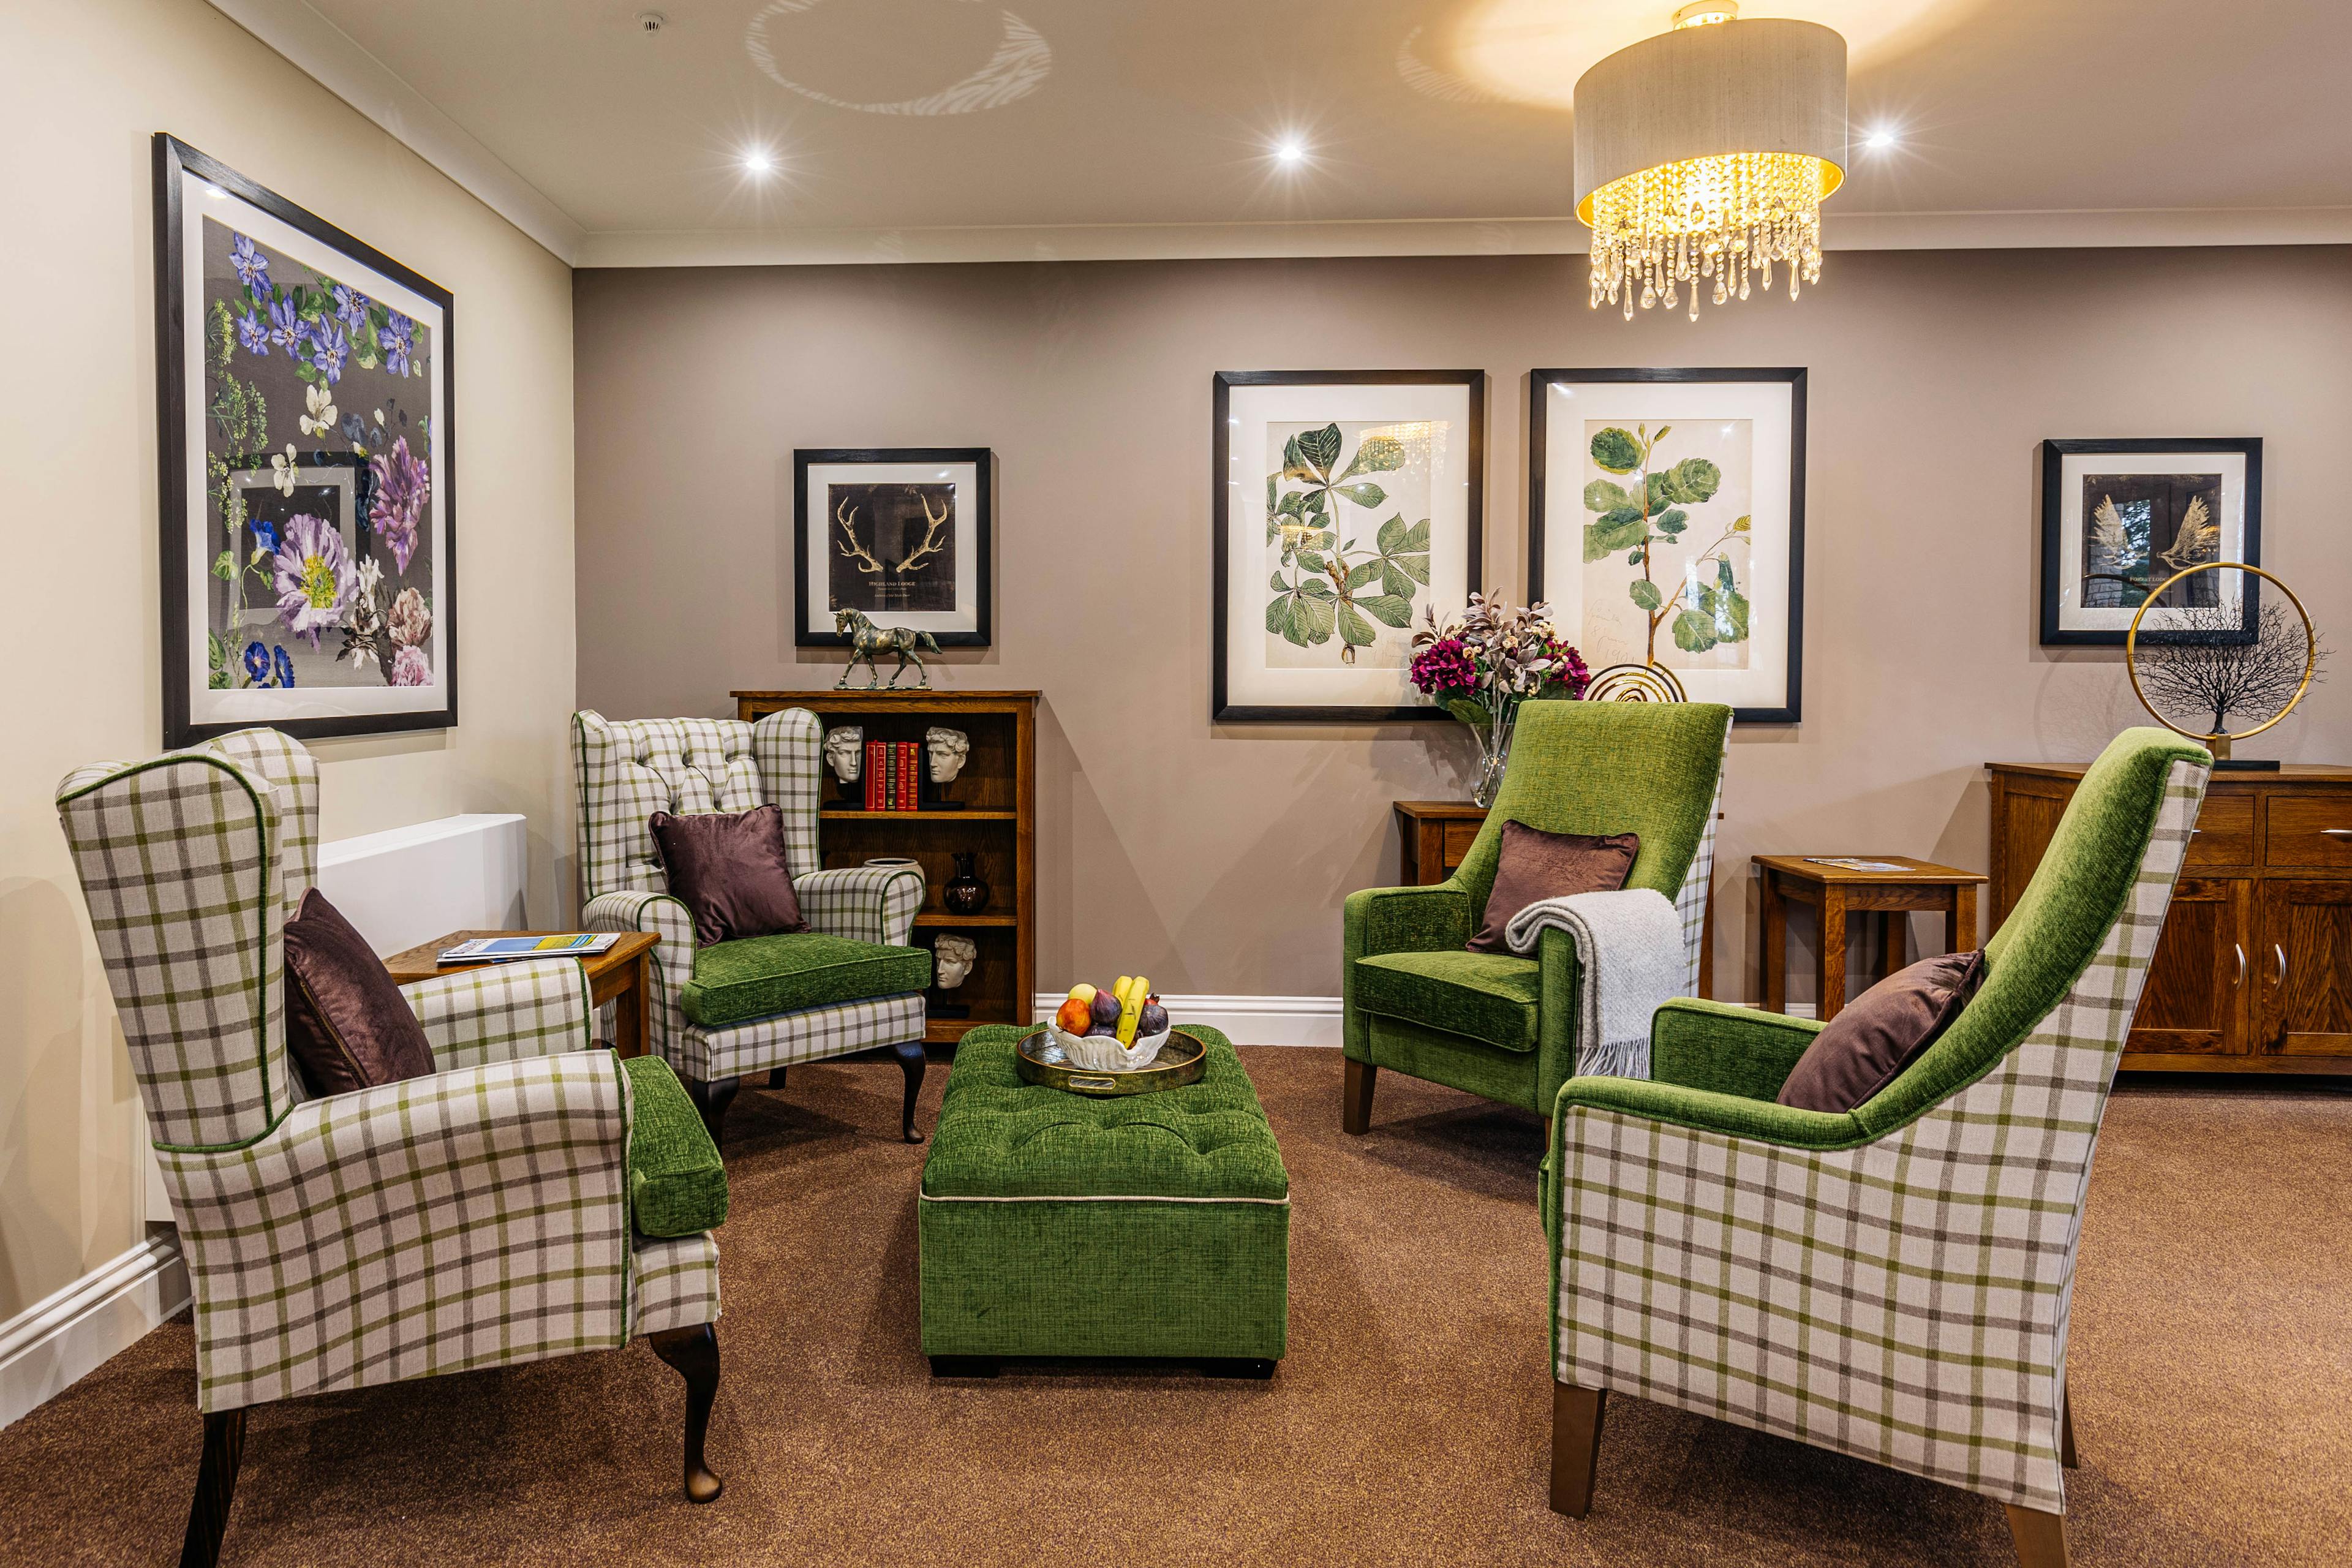 Communal Lounge at Parley Place Care Home in Ferndown, Dorset